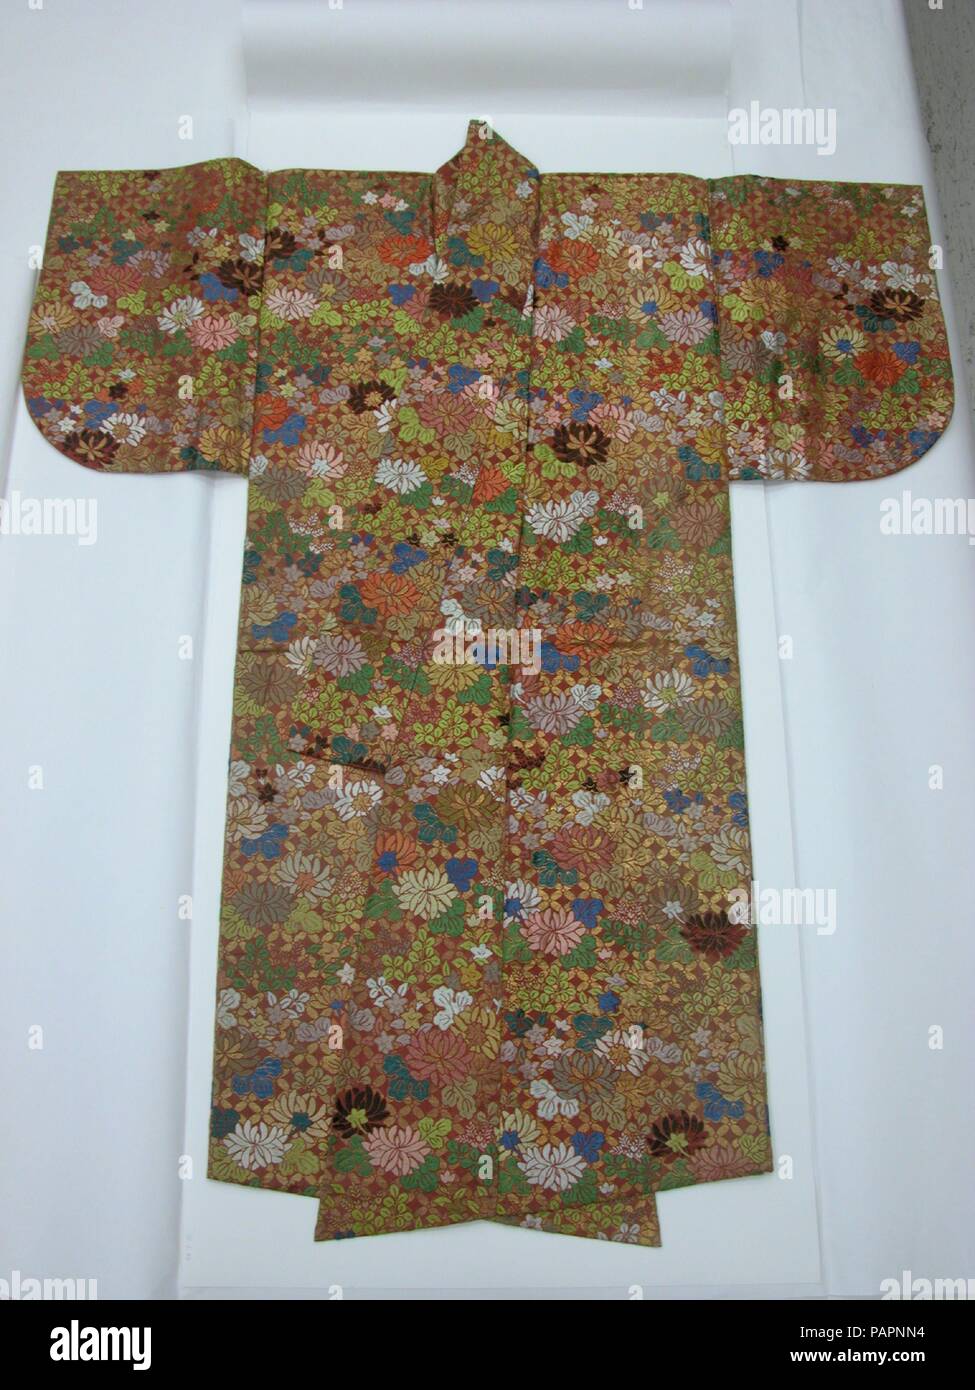 Noh Robe (Karaori) with Autumn Flowers and Grasses. Culture: Japan. Dimensions: Overall (with collar): H. 69 in. (175.3 cm); W. 58 in. (147.3 cm). Date: first half of the 19th century.  Karaori, literally 'Chinese Weave,' is a stiff brocade technique that employs a uniform direction of weft in which long stitches of glossed silk threads are floated over an unglossed silk twill ground, while foil-covered flat threads are bound close to the twill ground weave. The stiff karaori brocade does not drape easily, but it creates an angular effect, helping to evoke the spirit of a former noblewoman. Th Stock Photo